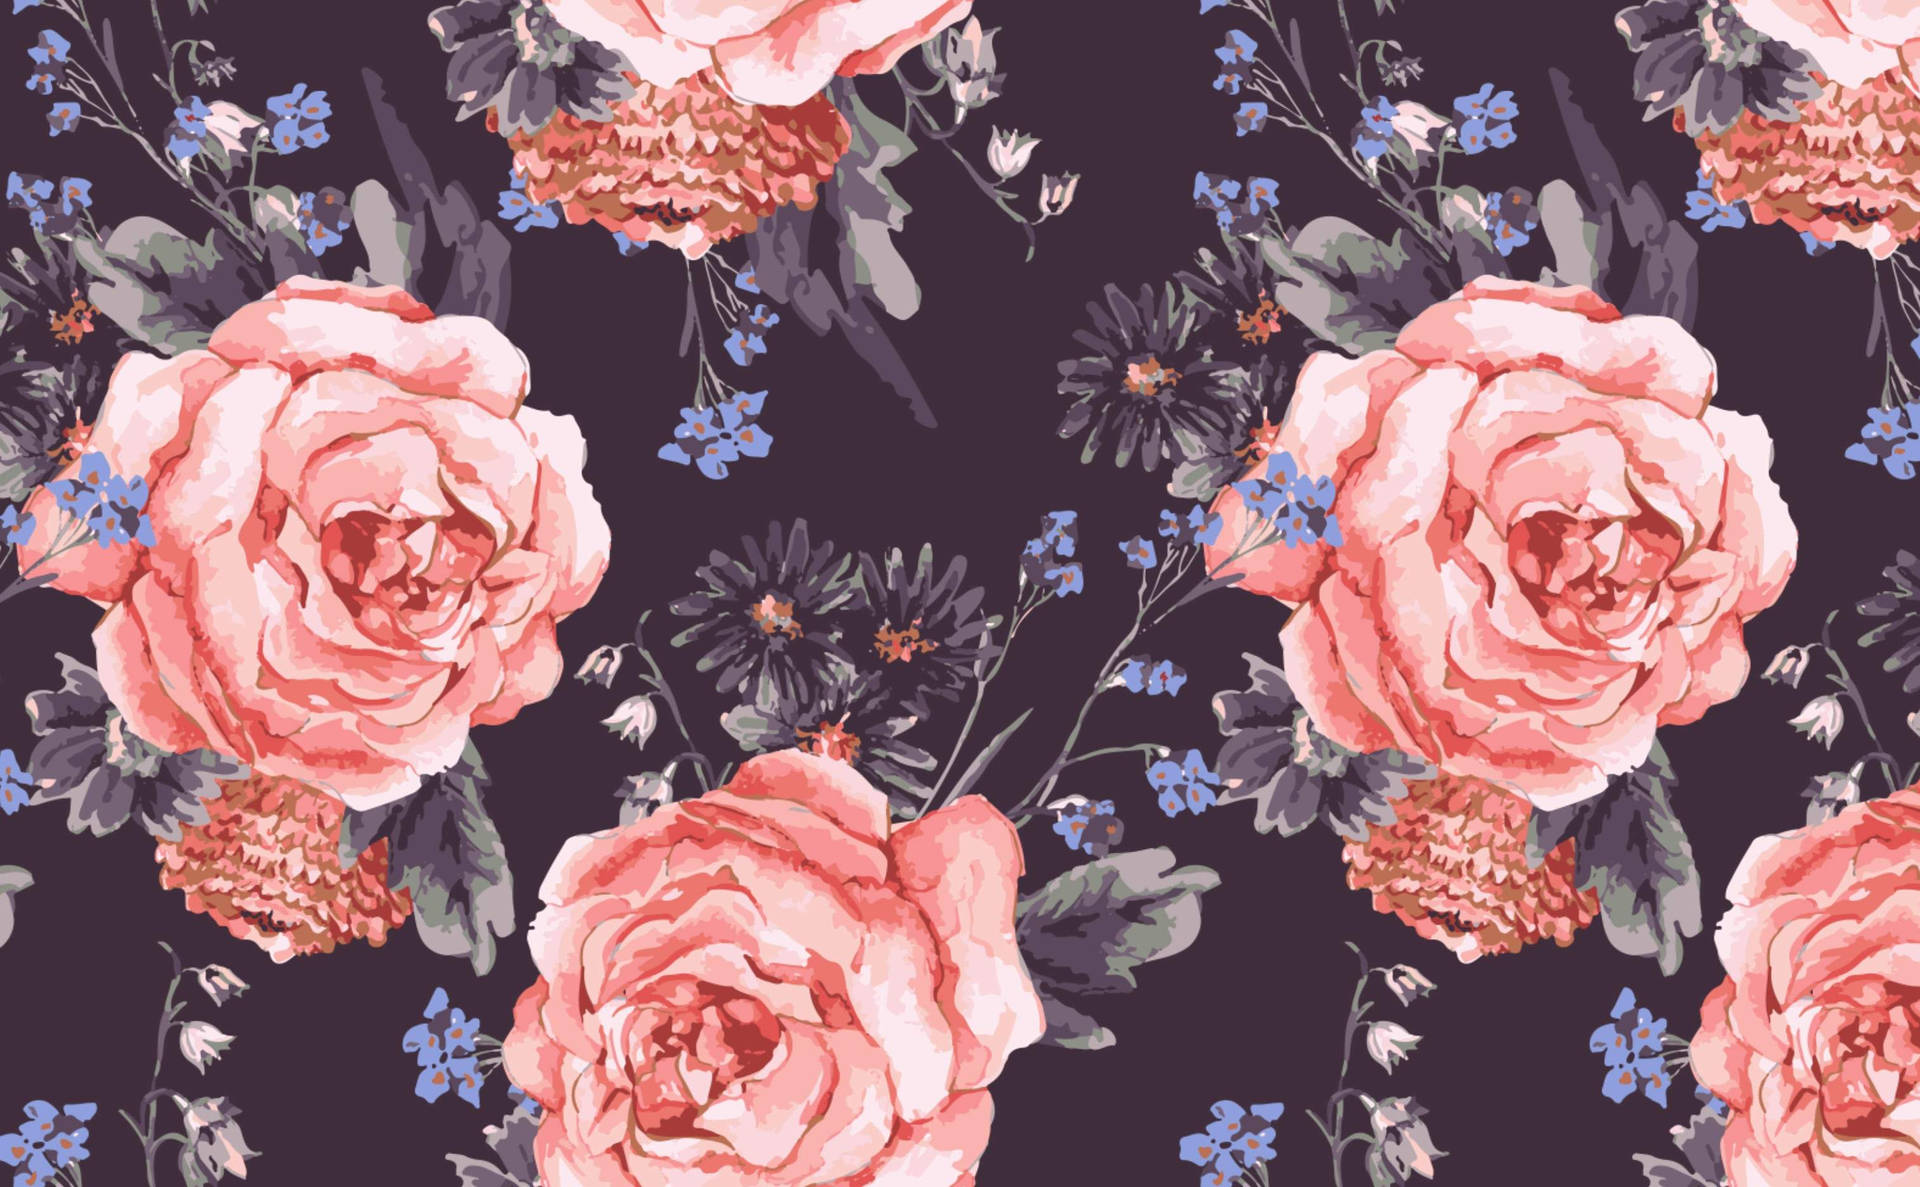 Aesthetic Pink Roses Design